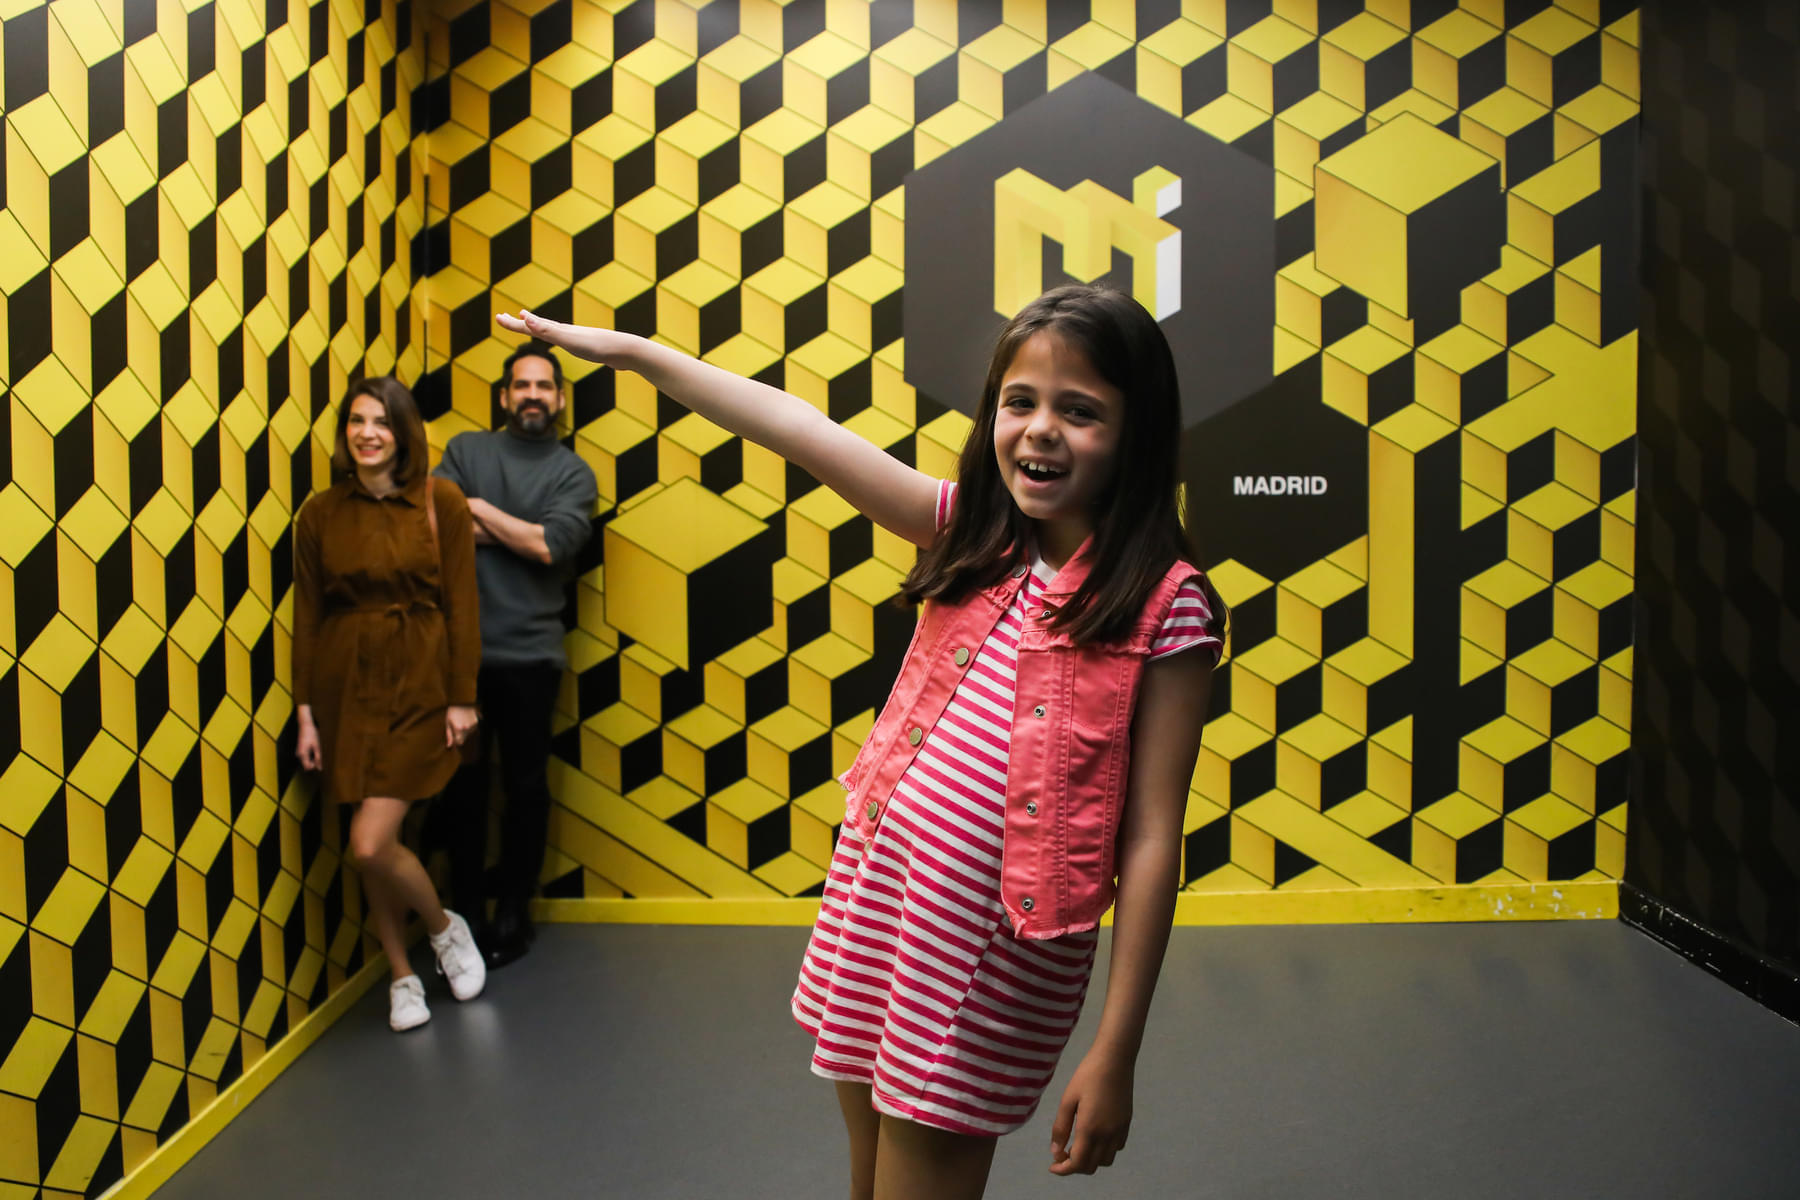 Spend a fun-filled time in the Museum Of Illusions Madrid